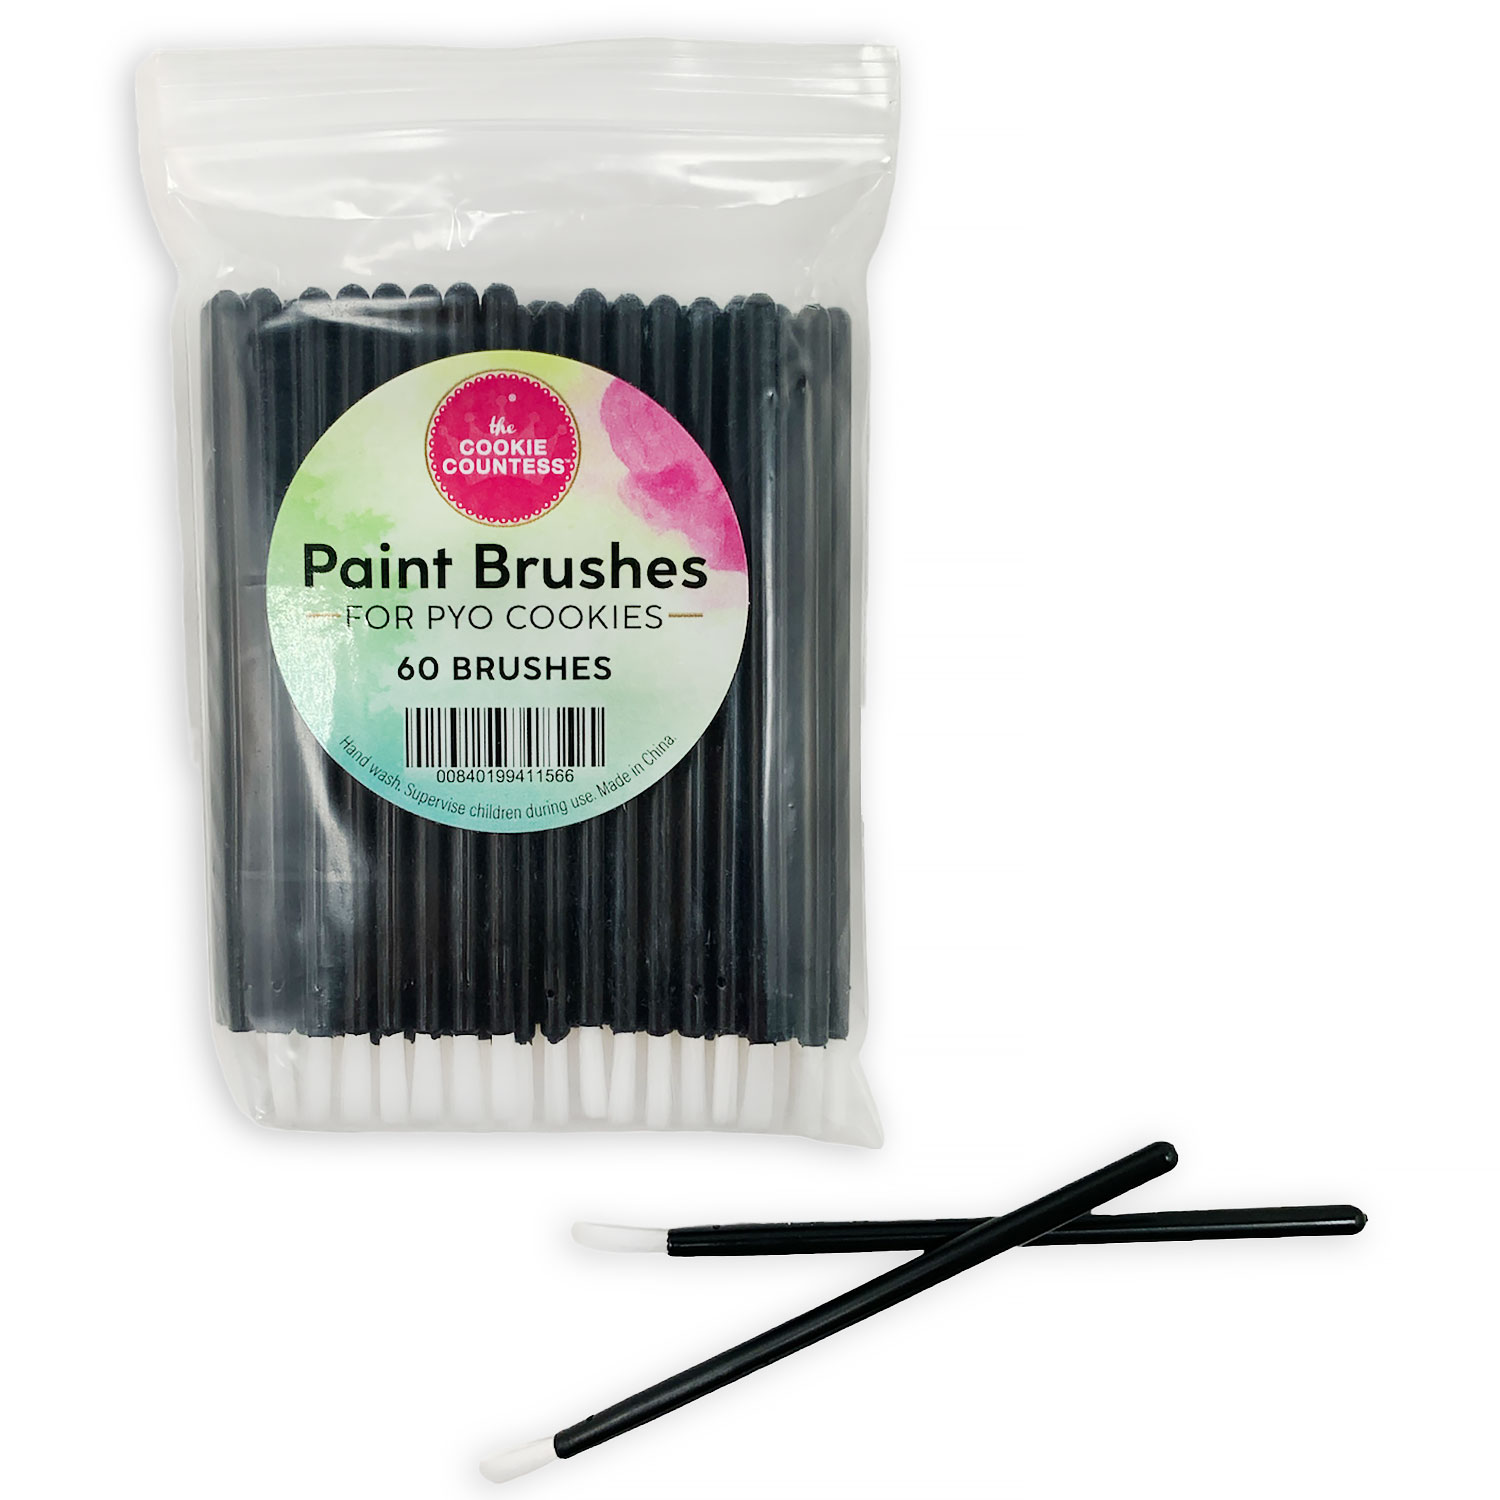 The Cookie Countess- Food Safe Paint Brushes for Pyo Cookies: Value Pack of 120 Brushes